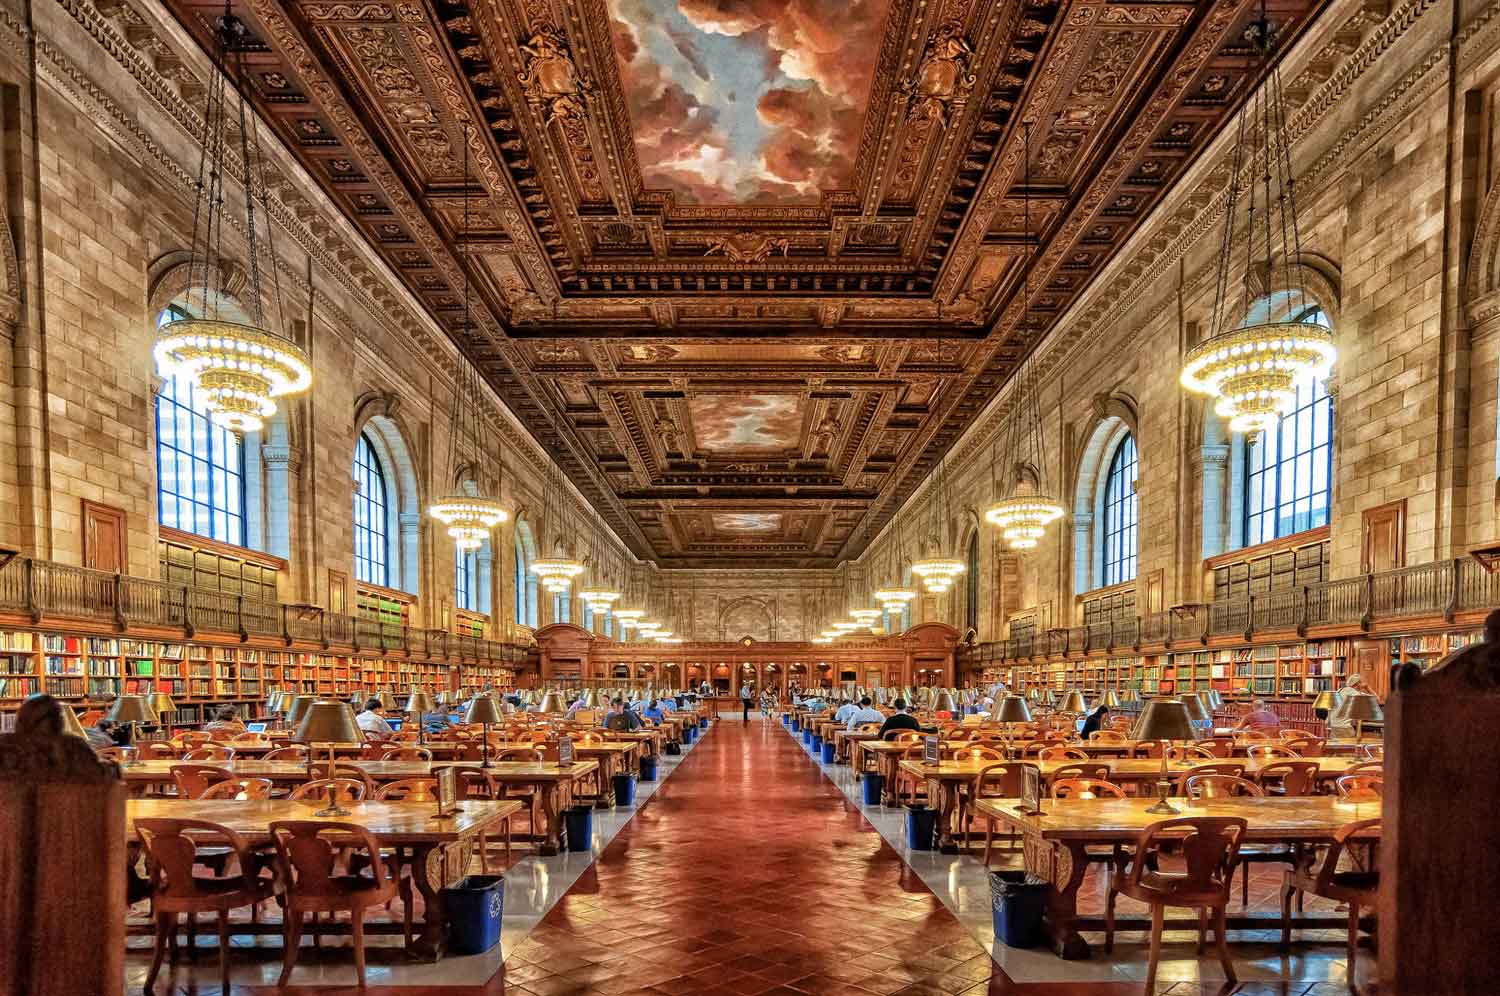 NYC Public Library